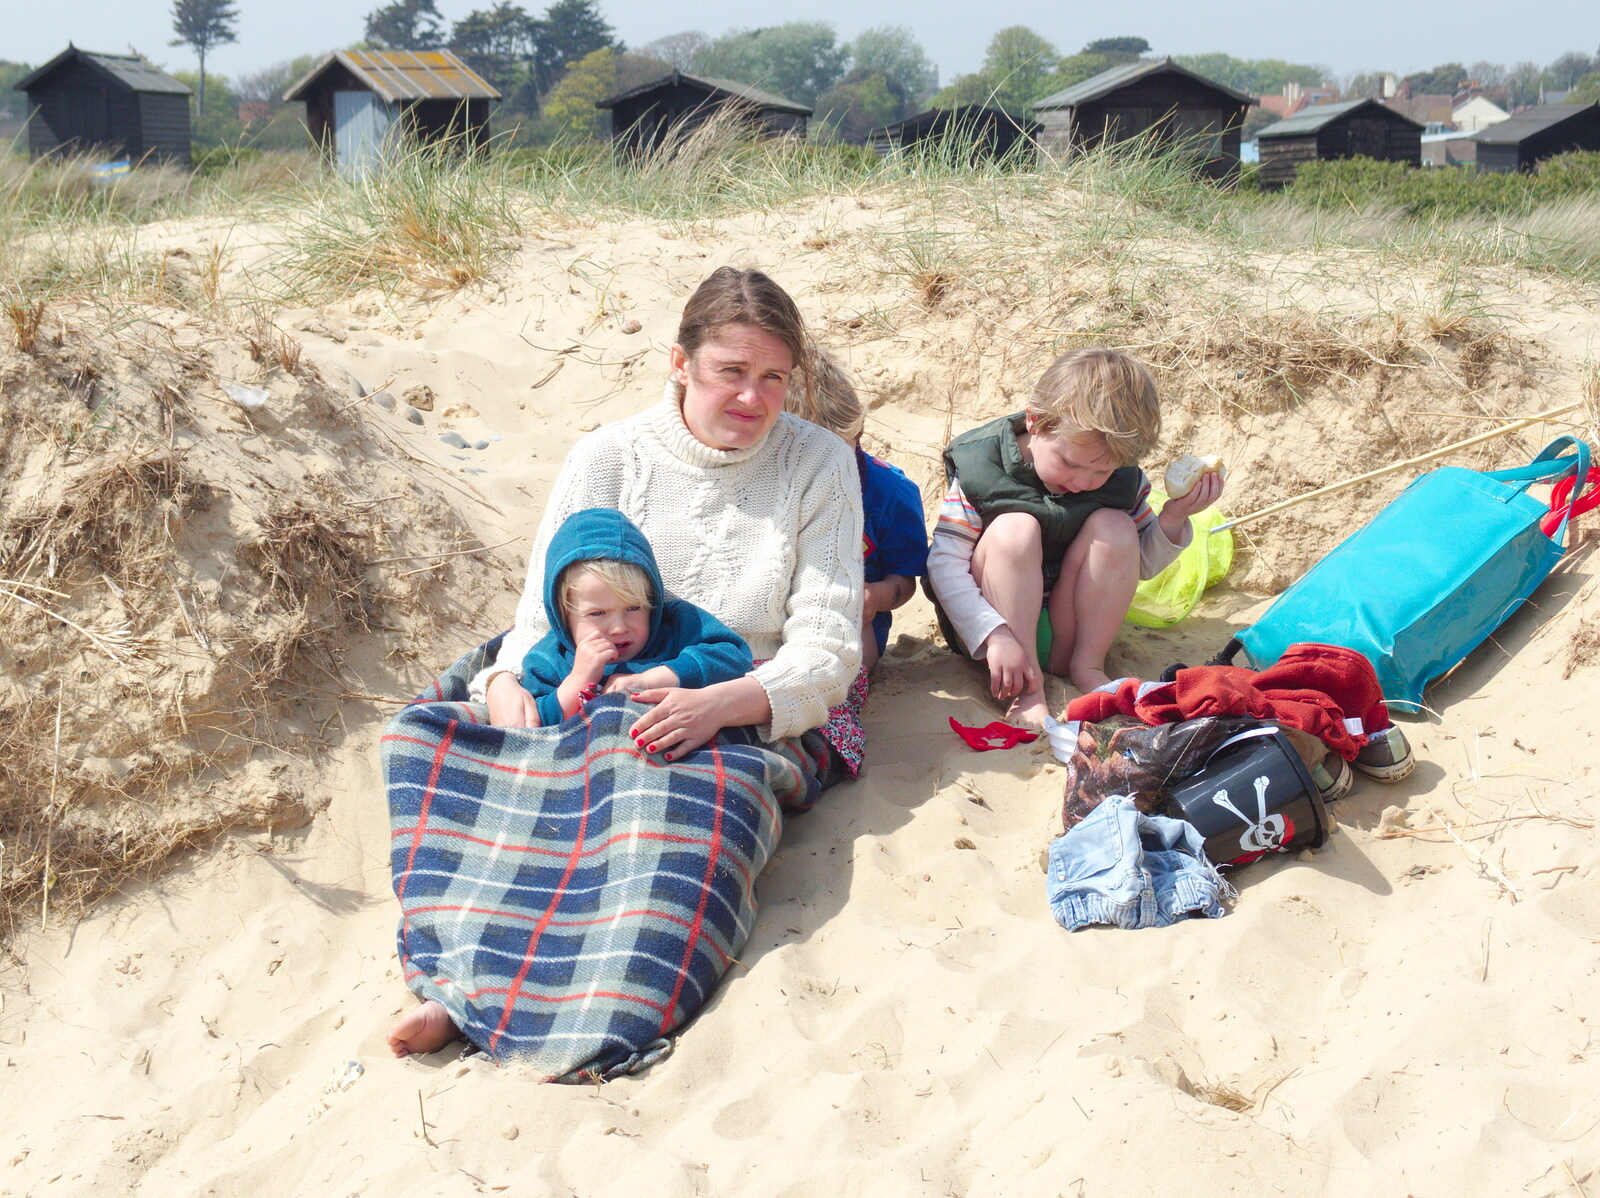 We brave the strong wind from Life's A Windy Beach, Walberswick, Suffolk - 5th May 2014